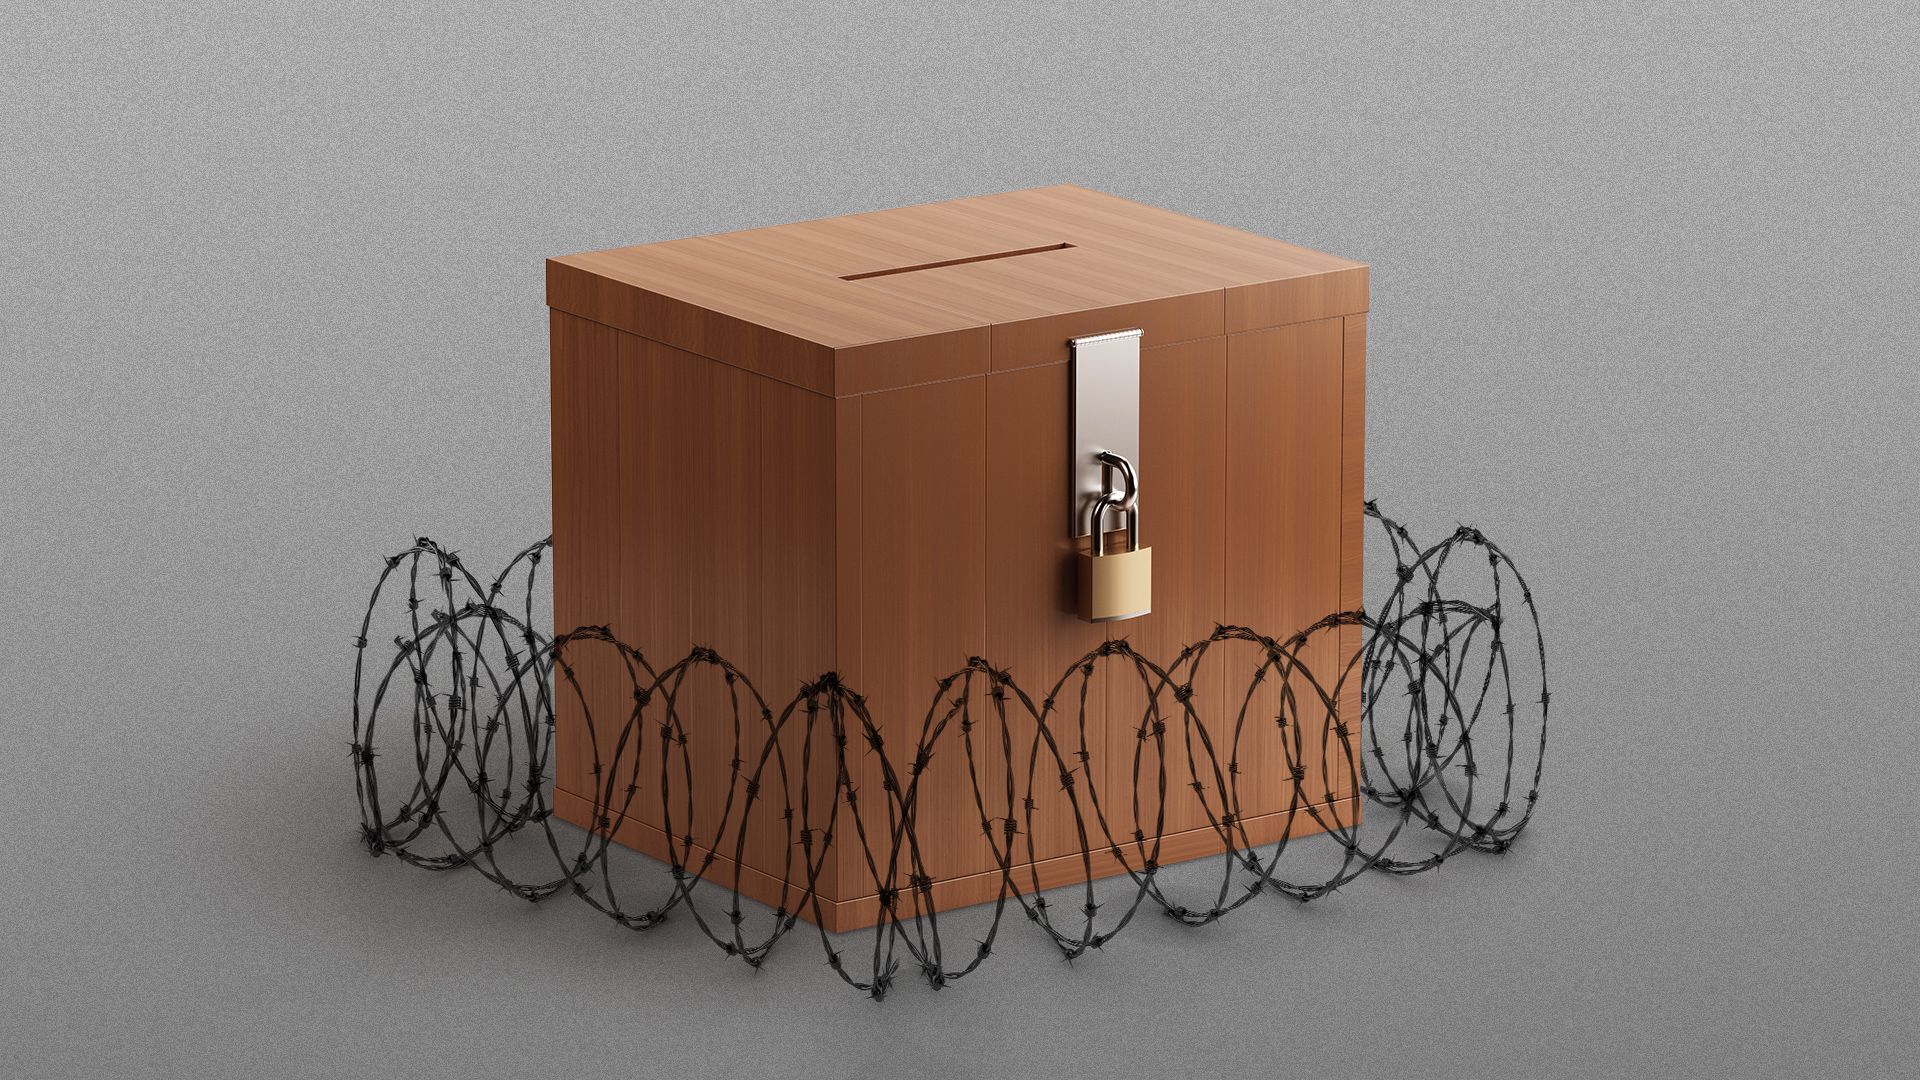 Illustration of a ballot box surrounded by barbed wire. 